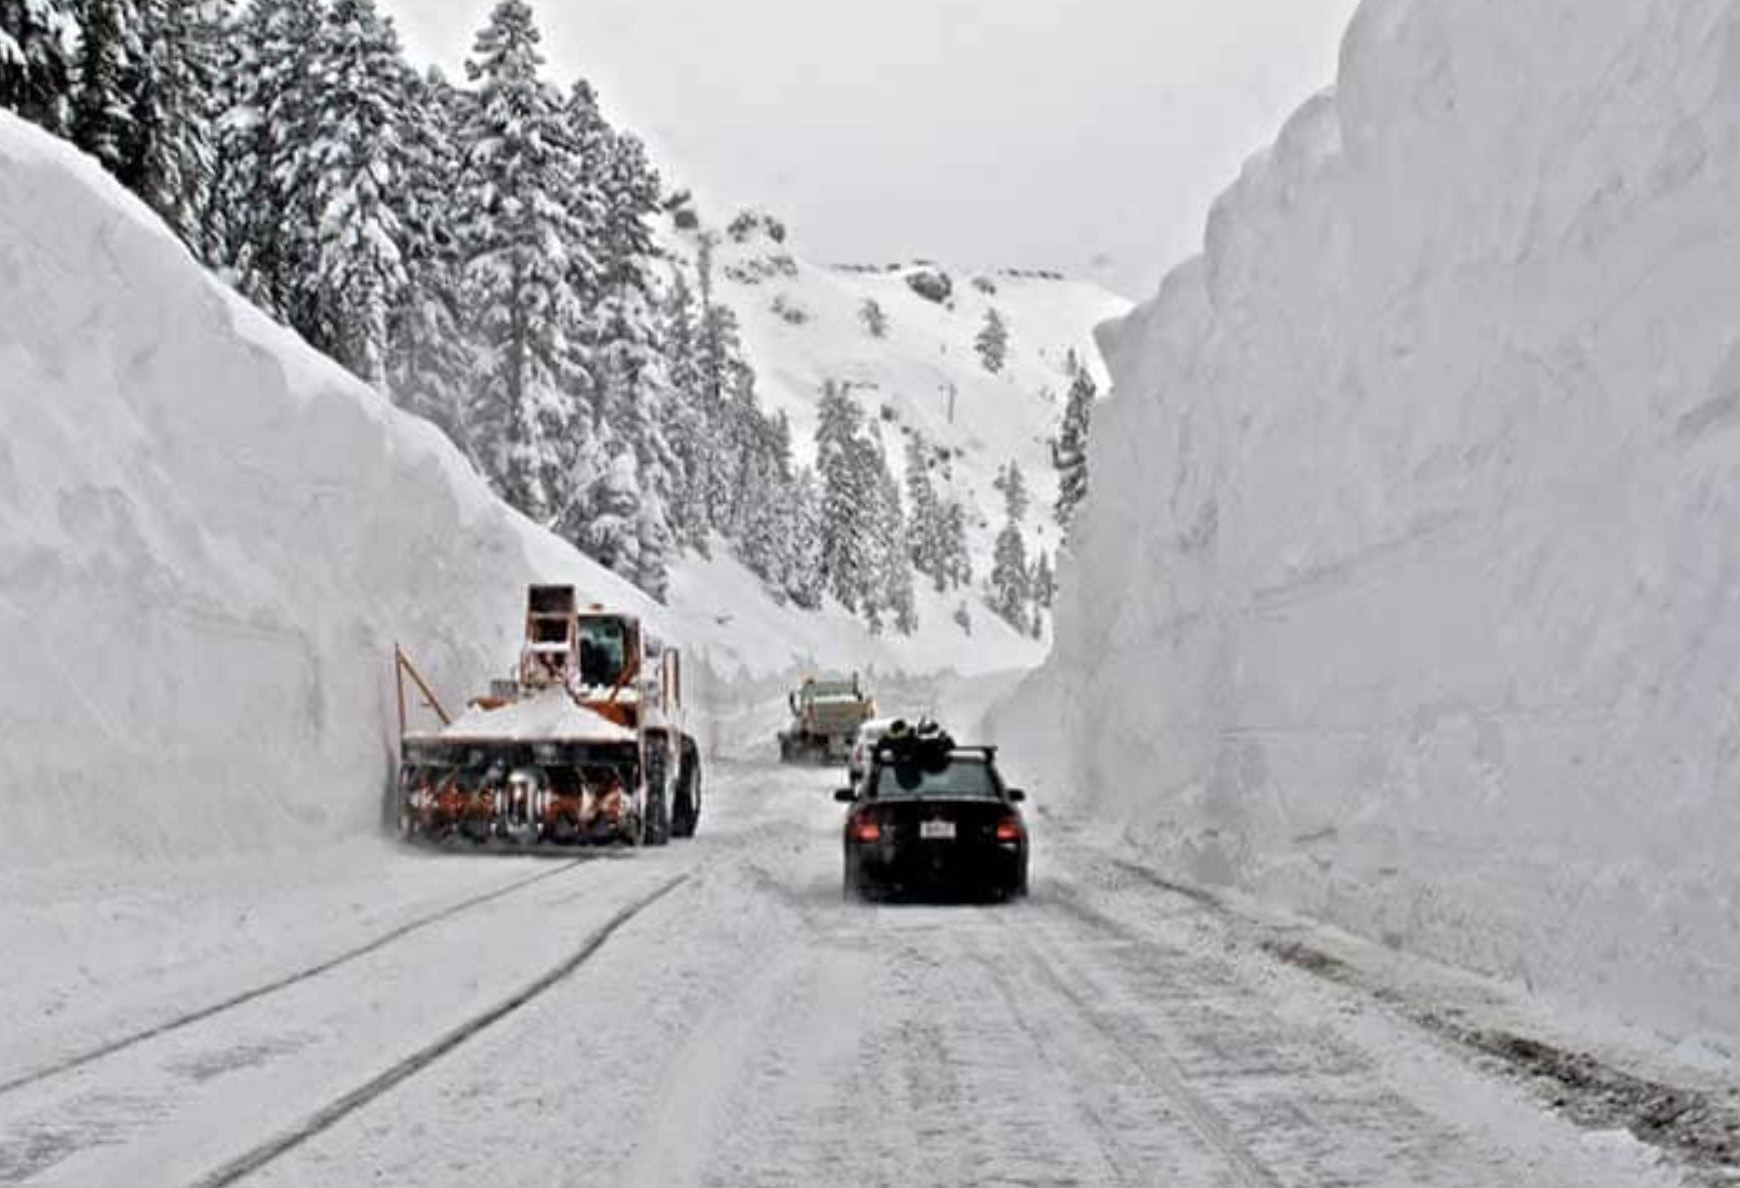 Here's what recordbreaking snowfall in the Sierra looks like from my